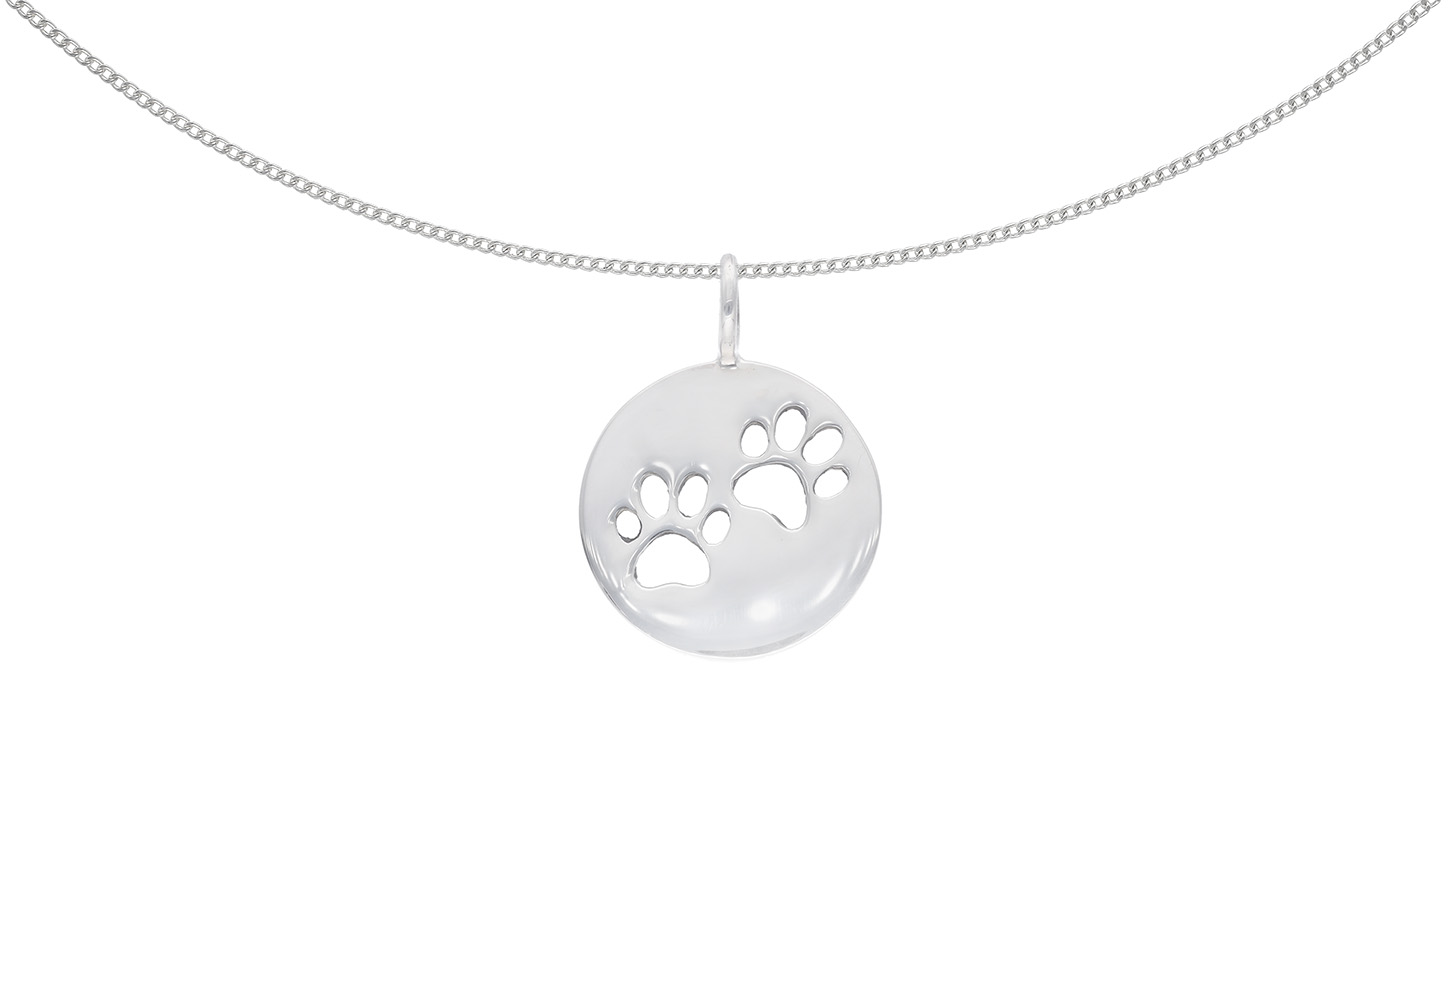 TANGPOET Dog Necklace Sterling Silver Puppy Dog Paw India | Ubuy